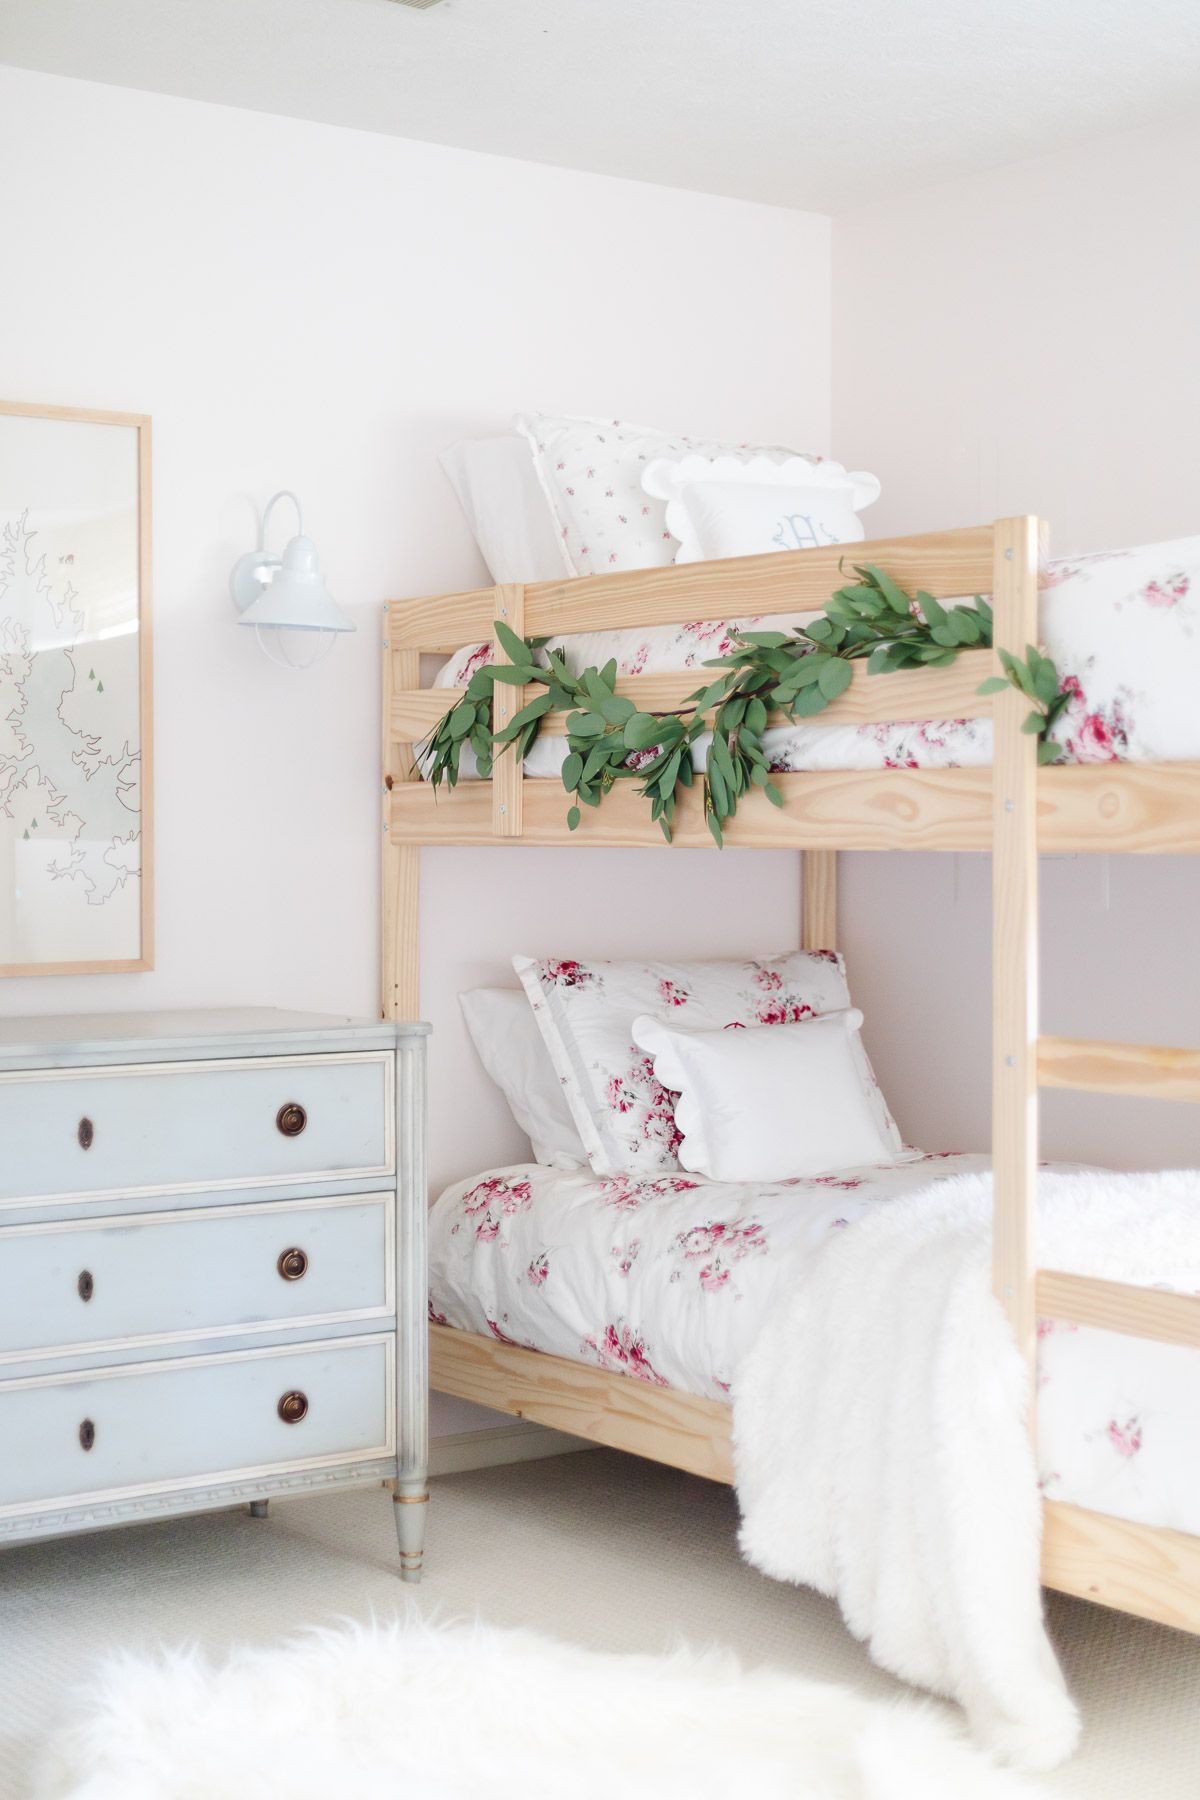 A bedroom with wooden bunk beds and floral bedding, decorated with garland for a coastal Christmas look.